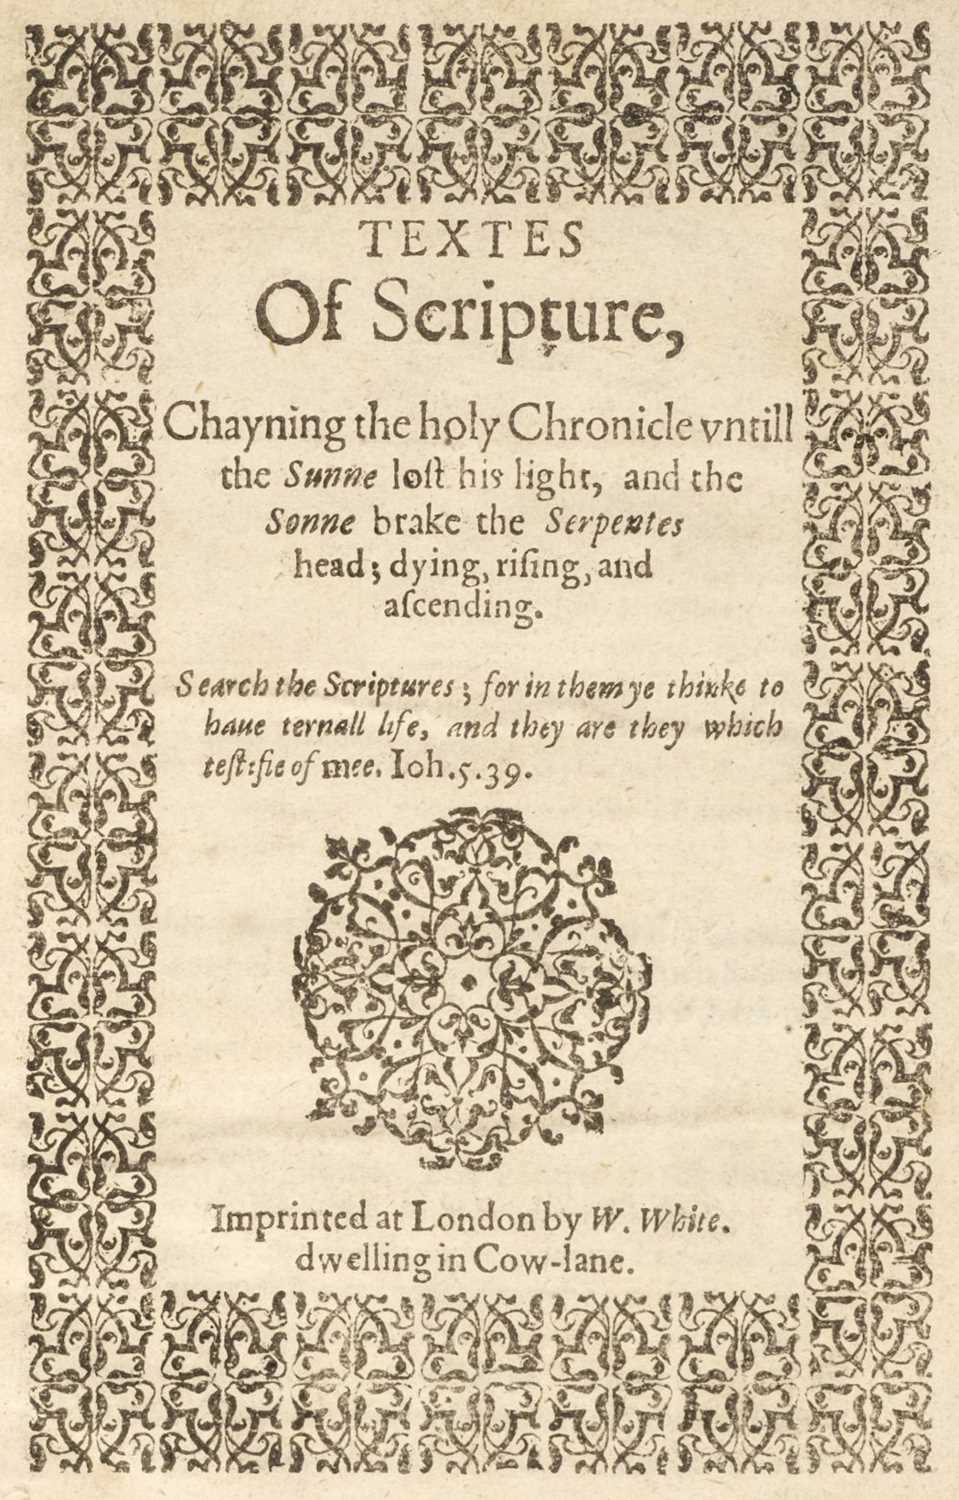 Lot 307 - Broughton (Hugh). Textes of Scripture, Chayning the holy Chronicle..., [c. 1612]